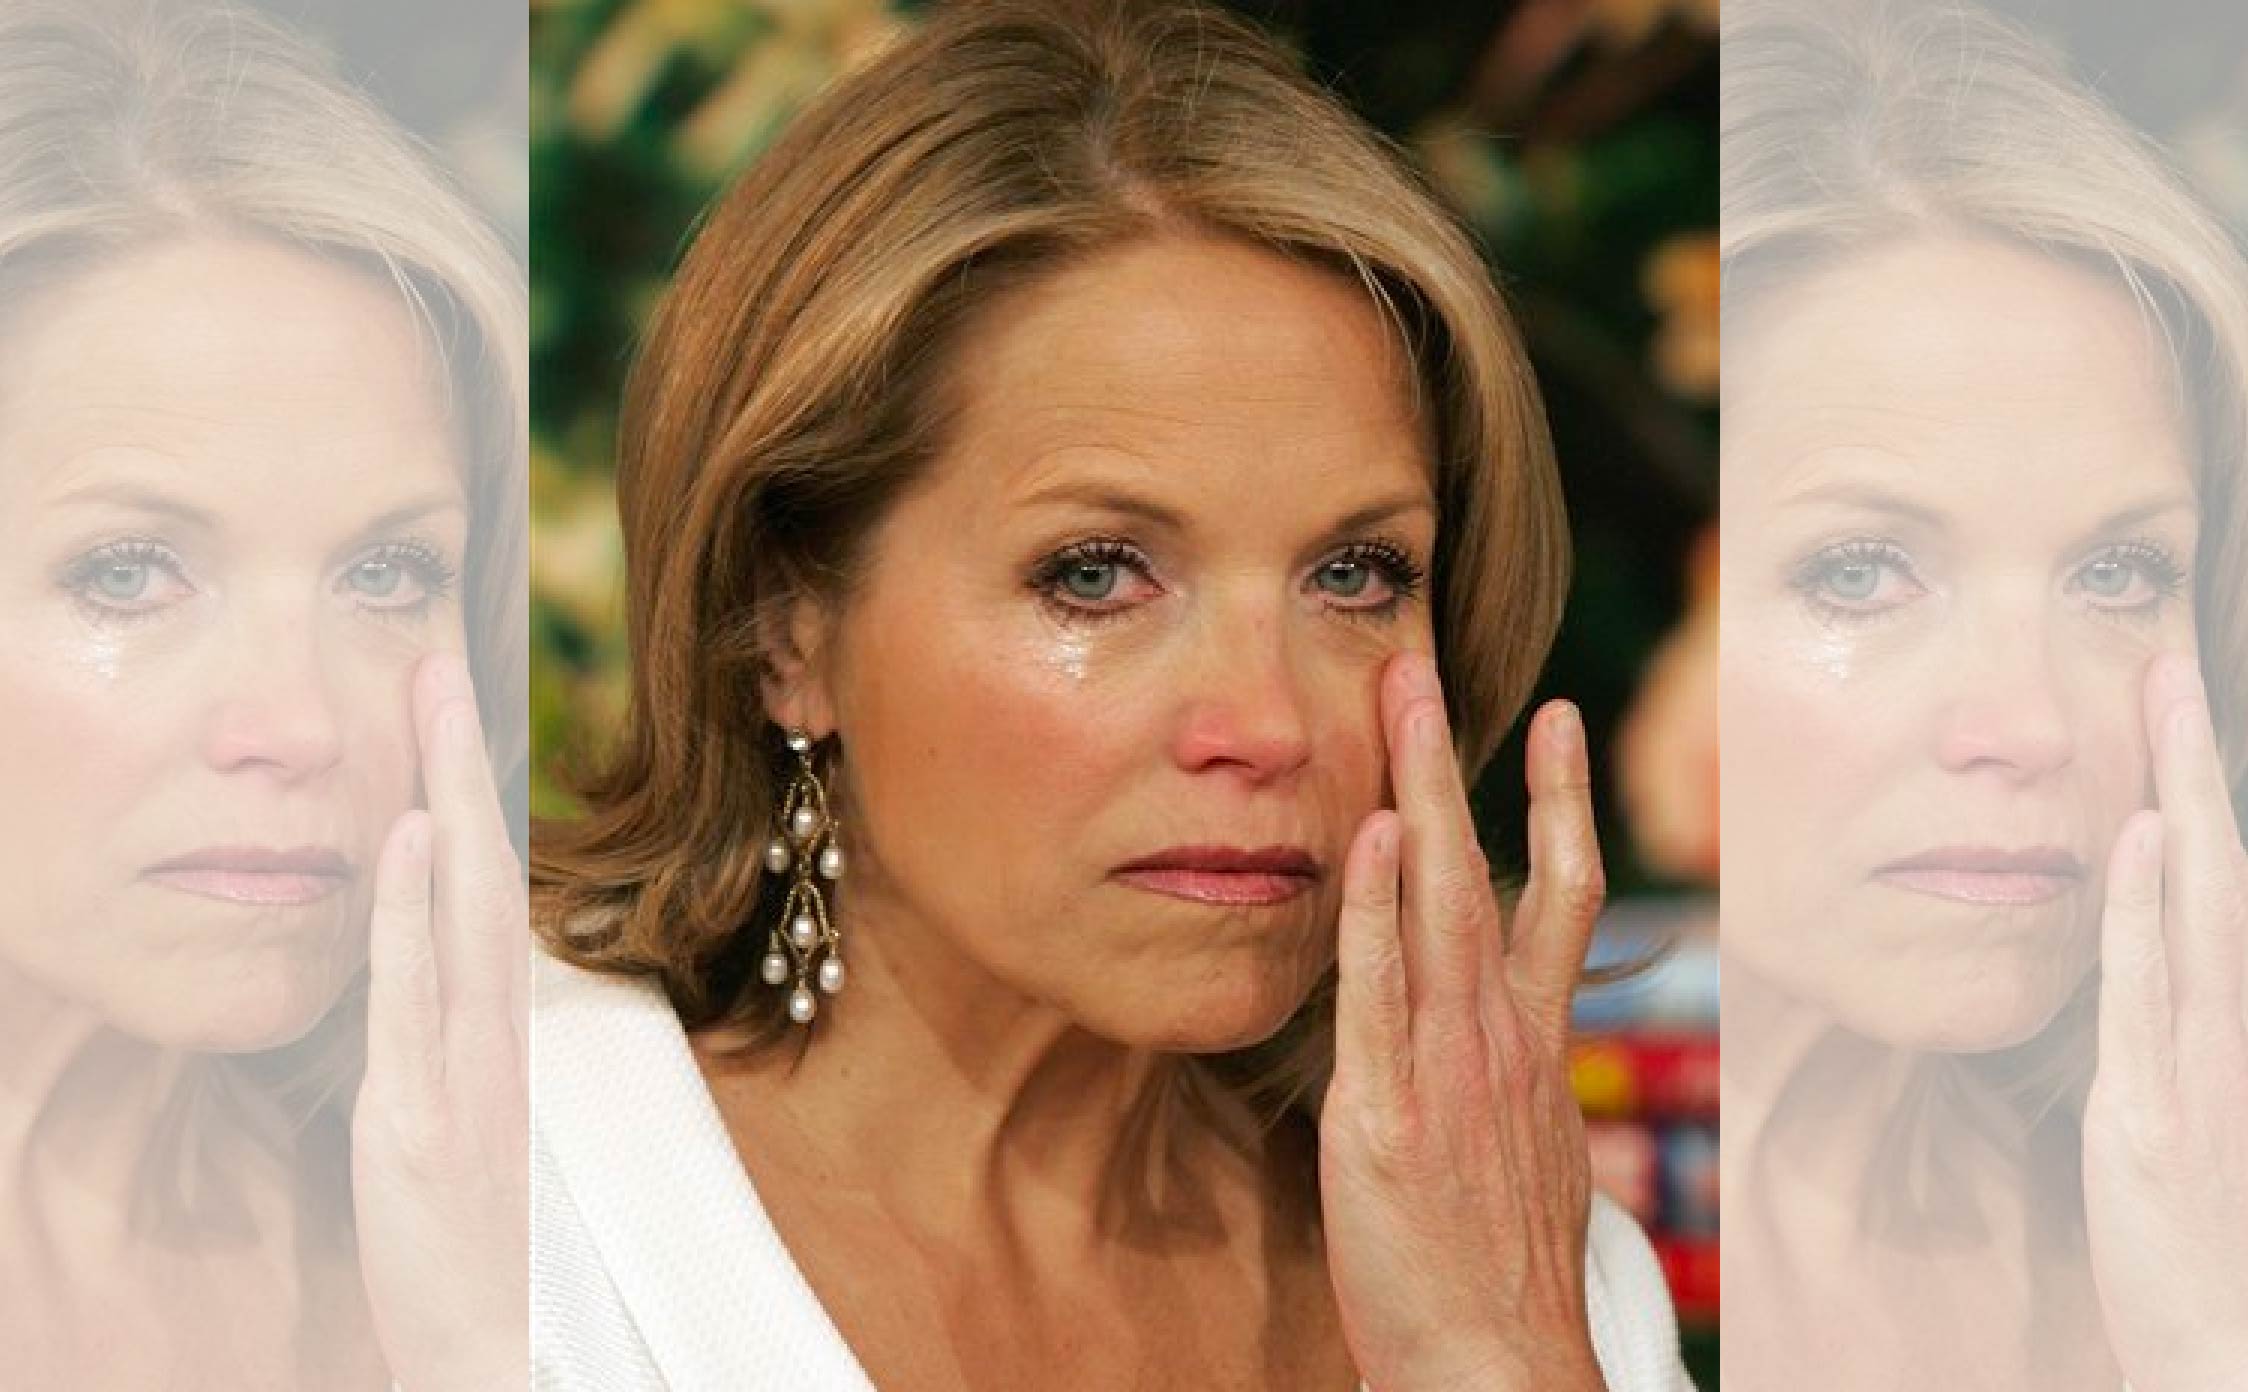 Katie Couric Just Lost "Big Role" Because of Her Nasty Attack On Trump Supporters - WayneDupree.com